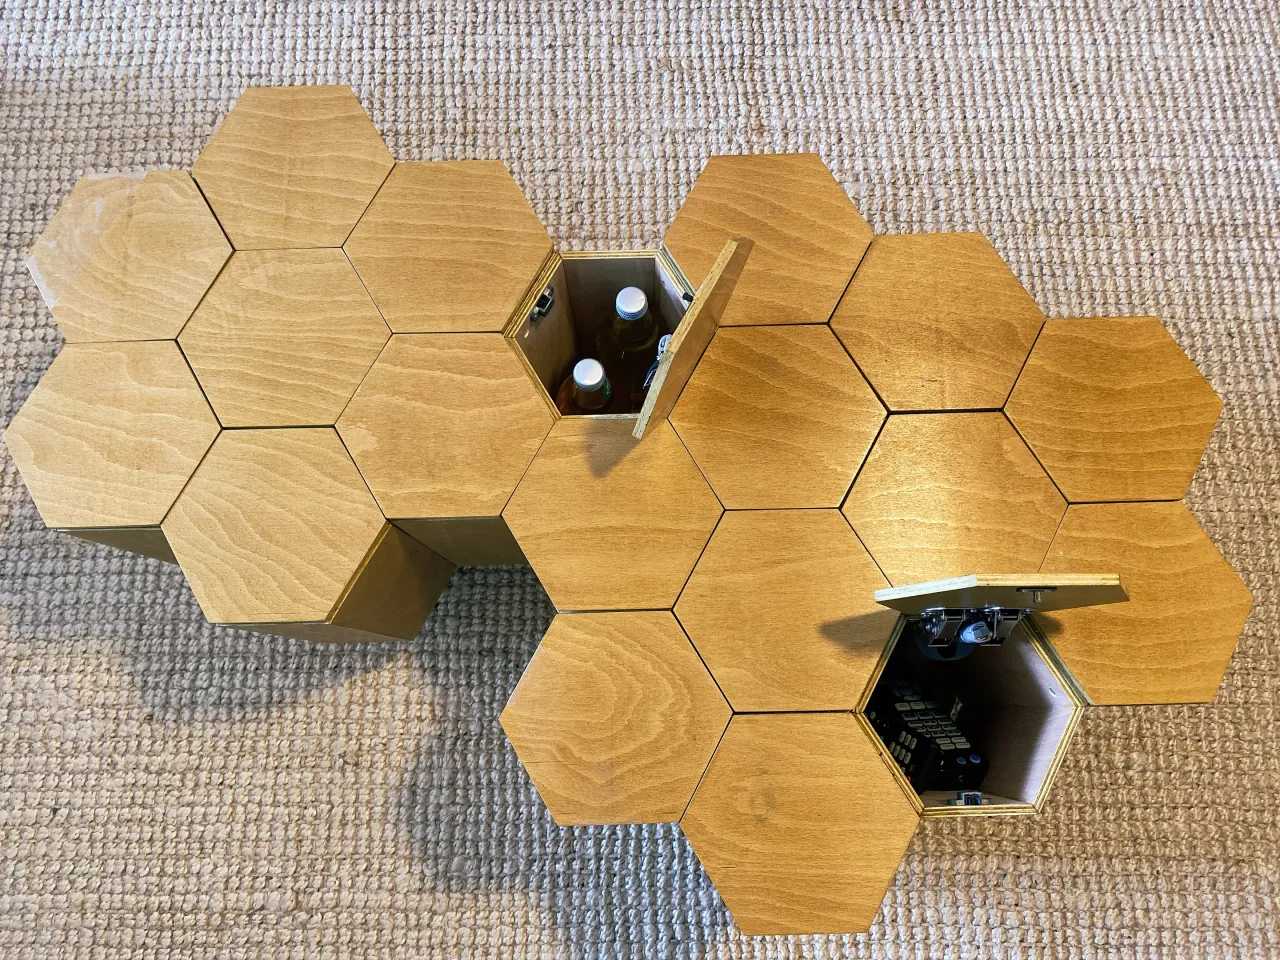 Modular honeycomb coffee table with built-in storage and pop-up